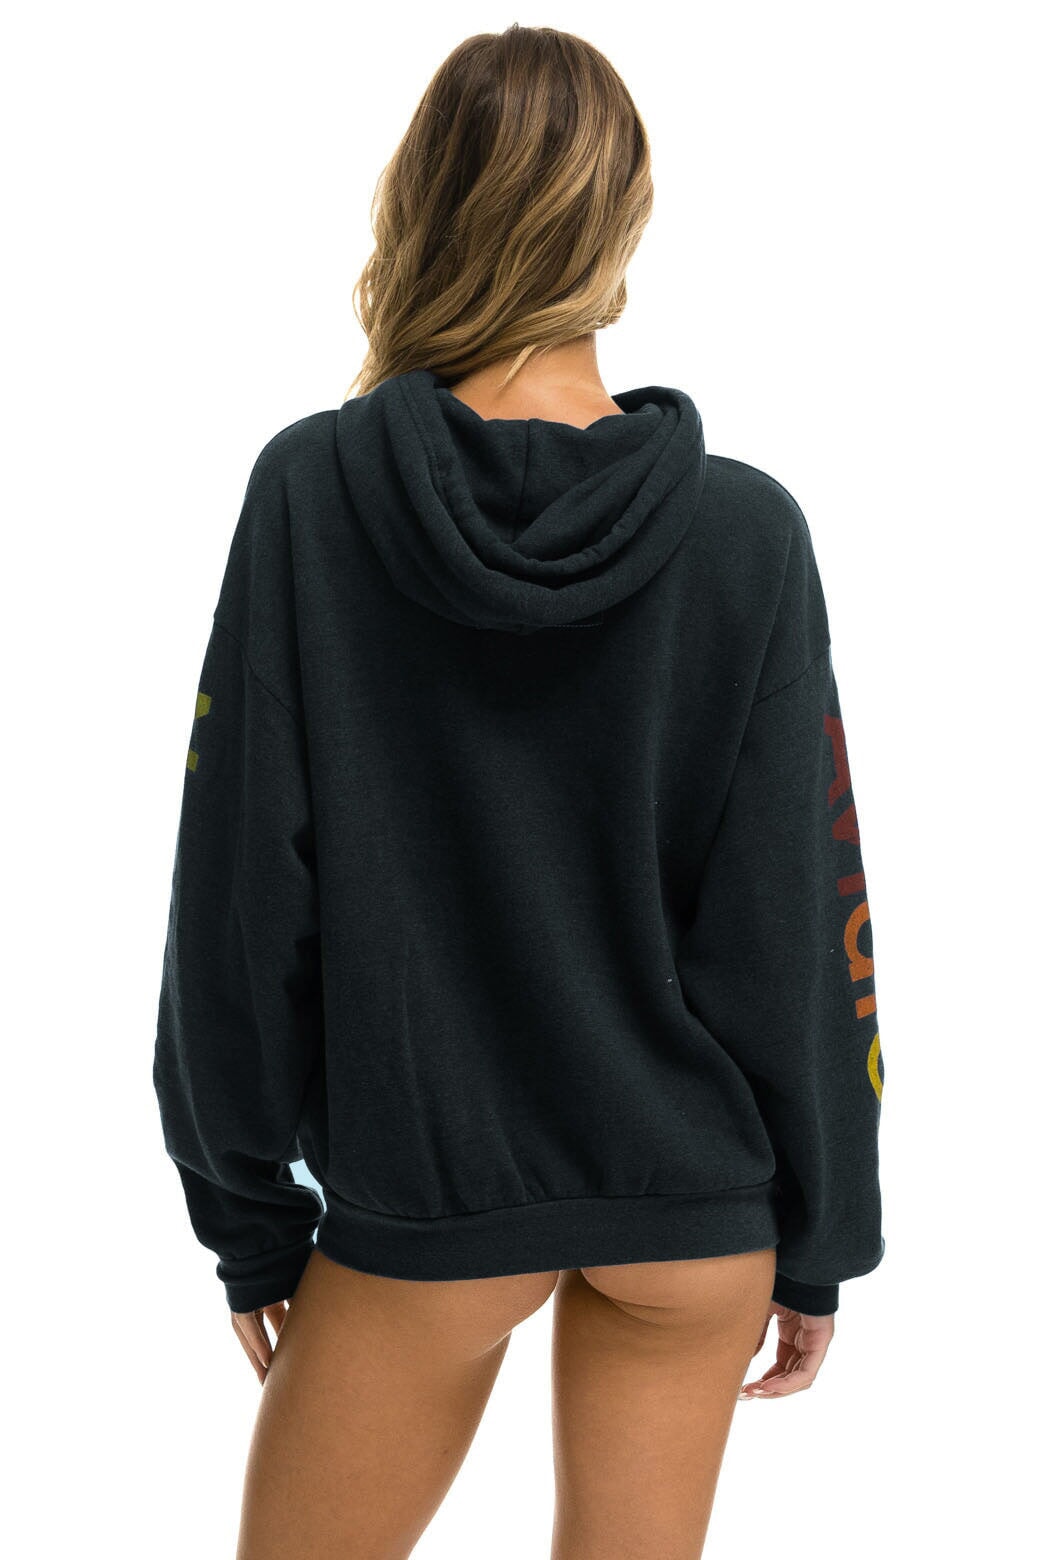 AVIATOR NATION MILL VALLEY RELAXED PULLOVER HOODIE - CHARCOAL Hoodie Aviator Nation 